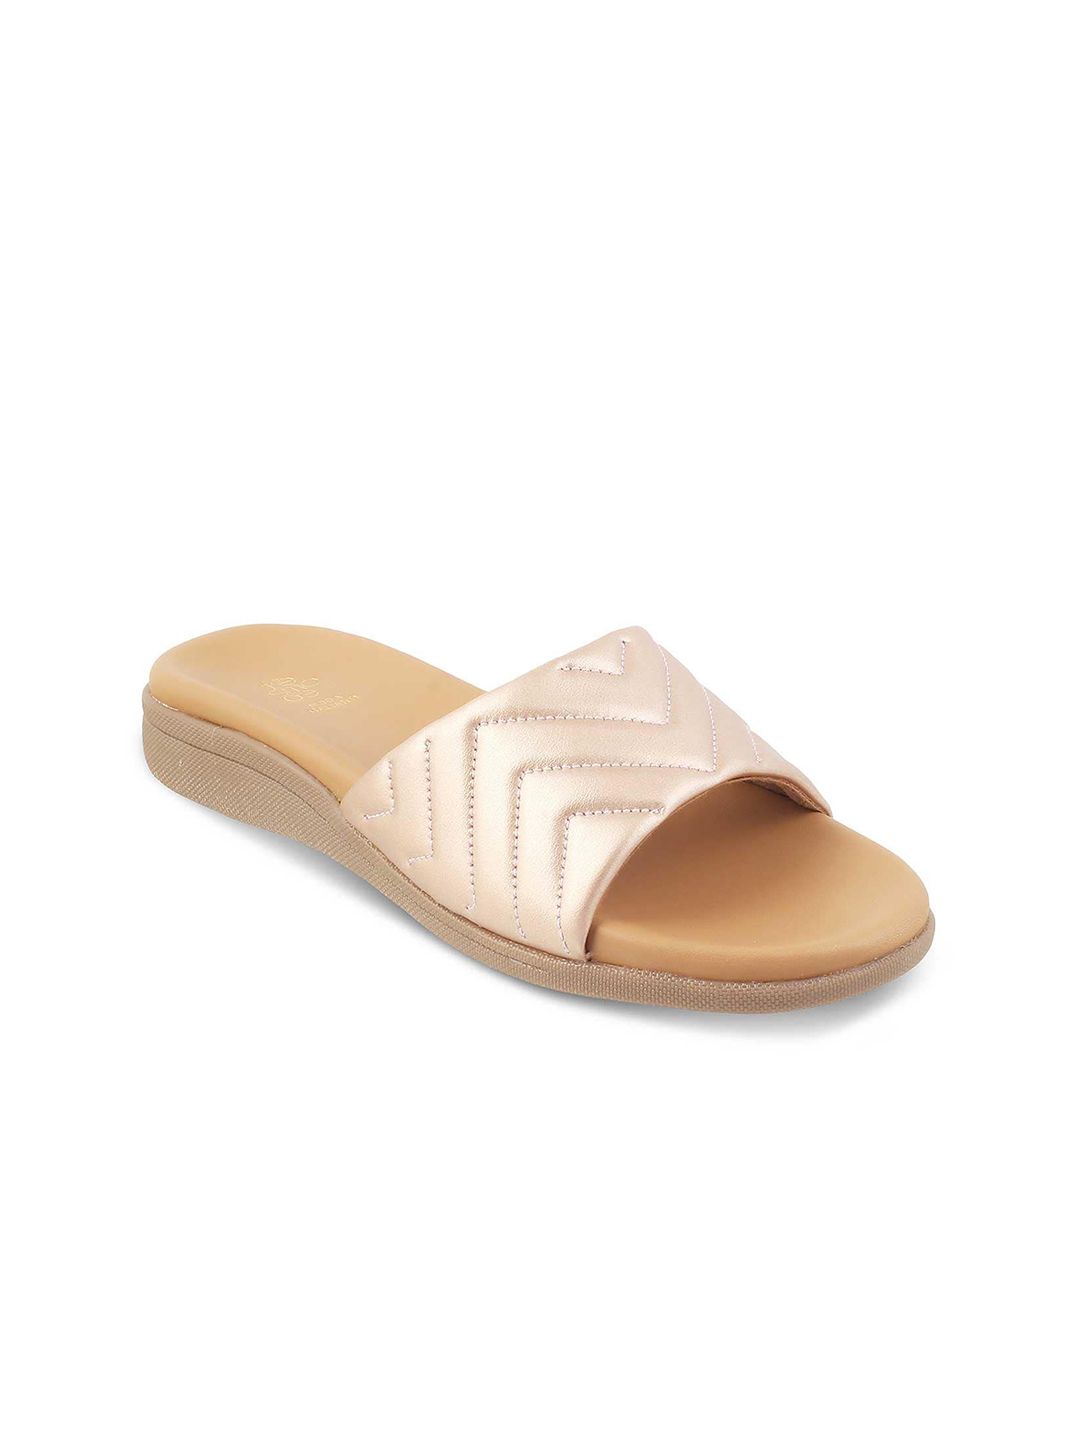 Tresmode COLFLAT Textured Open Toe Flats Price in India